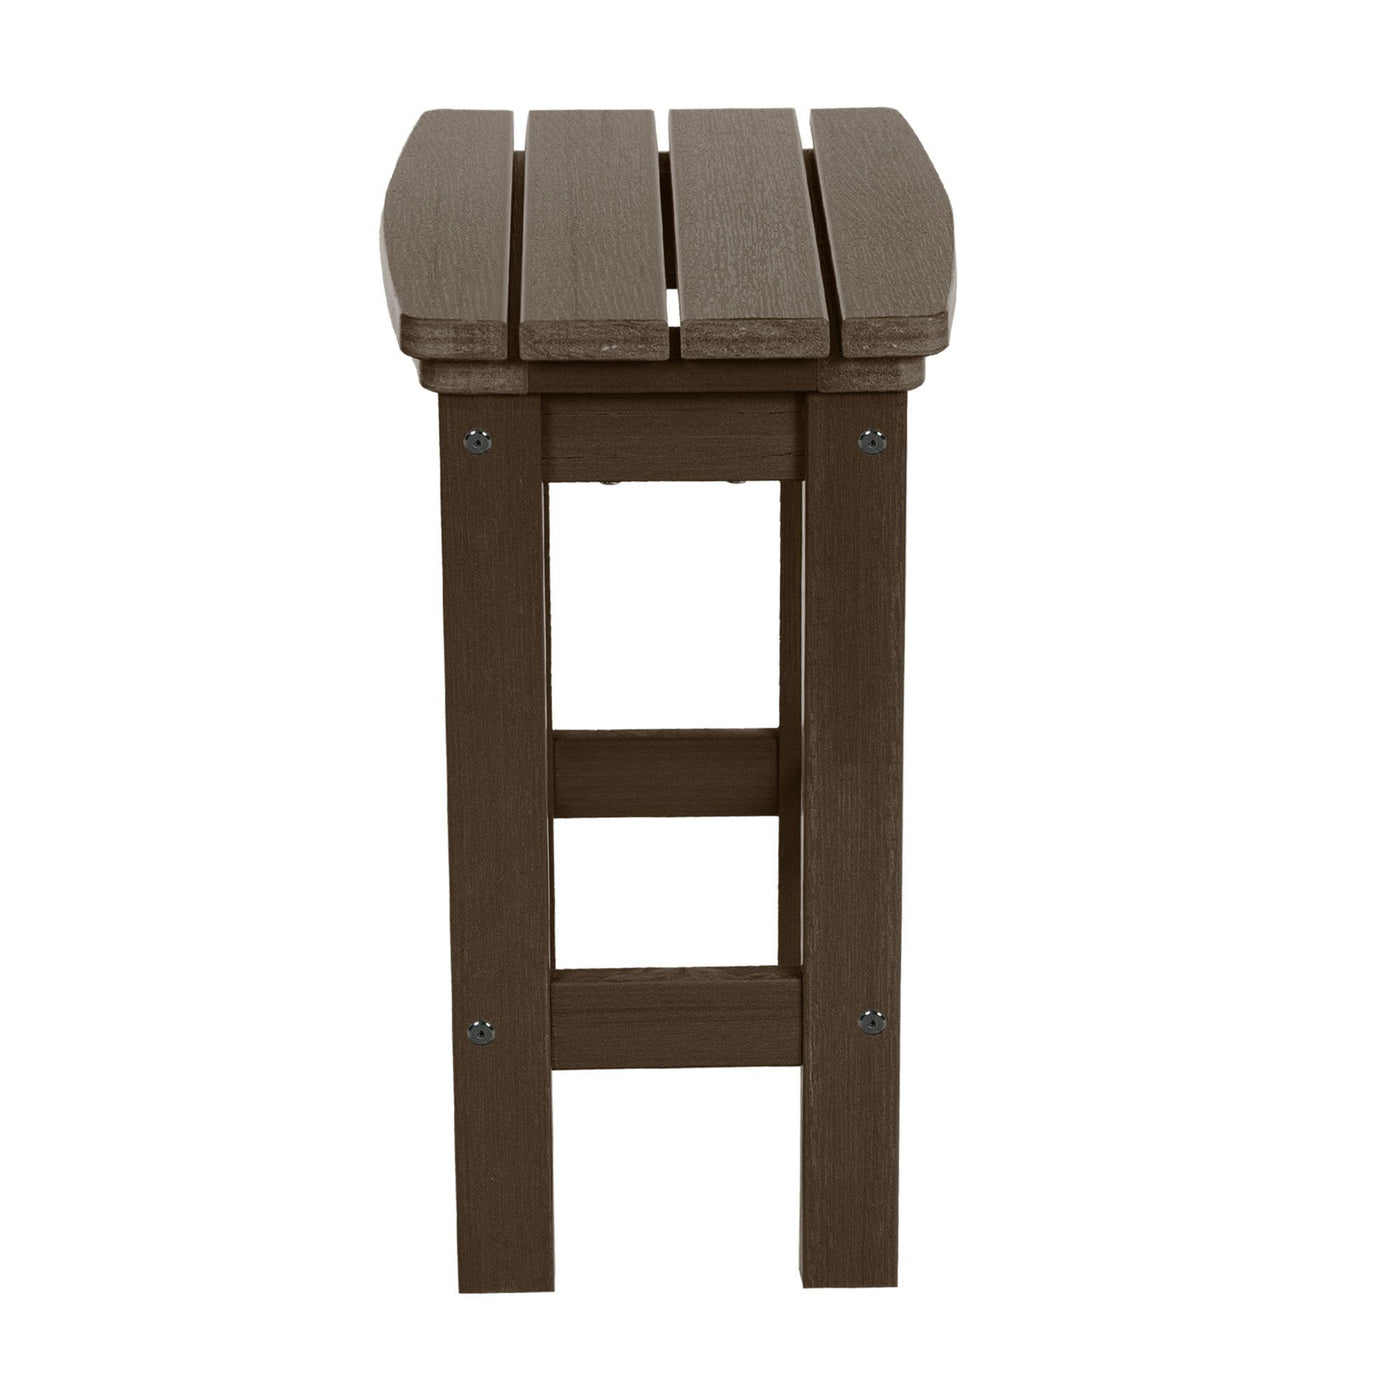 Side view of Lehigh counter height stool in Weathered Acorn